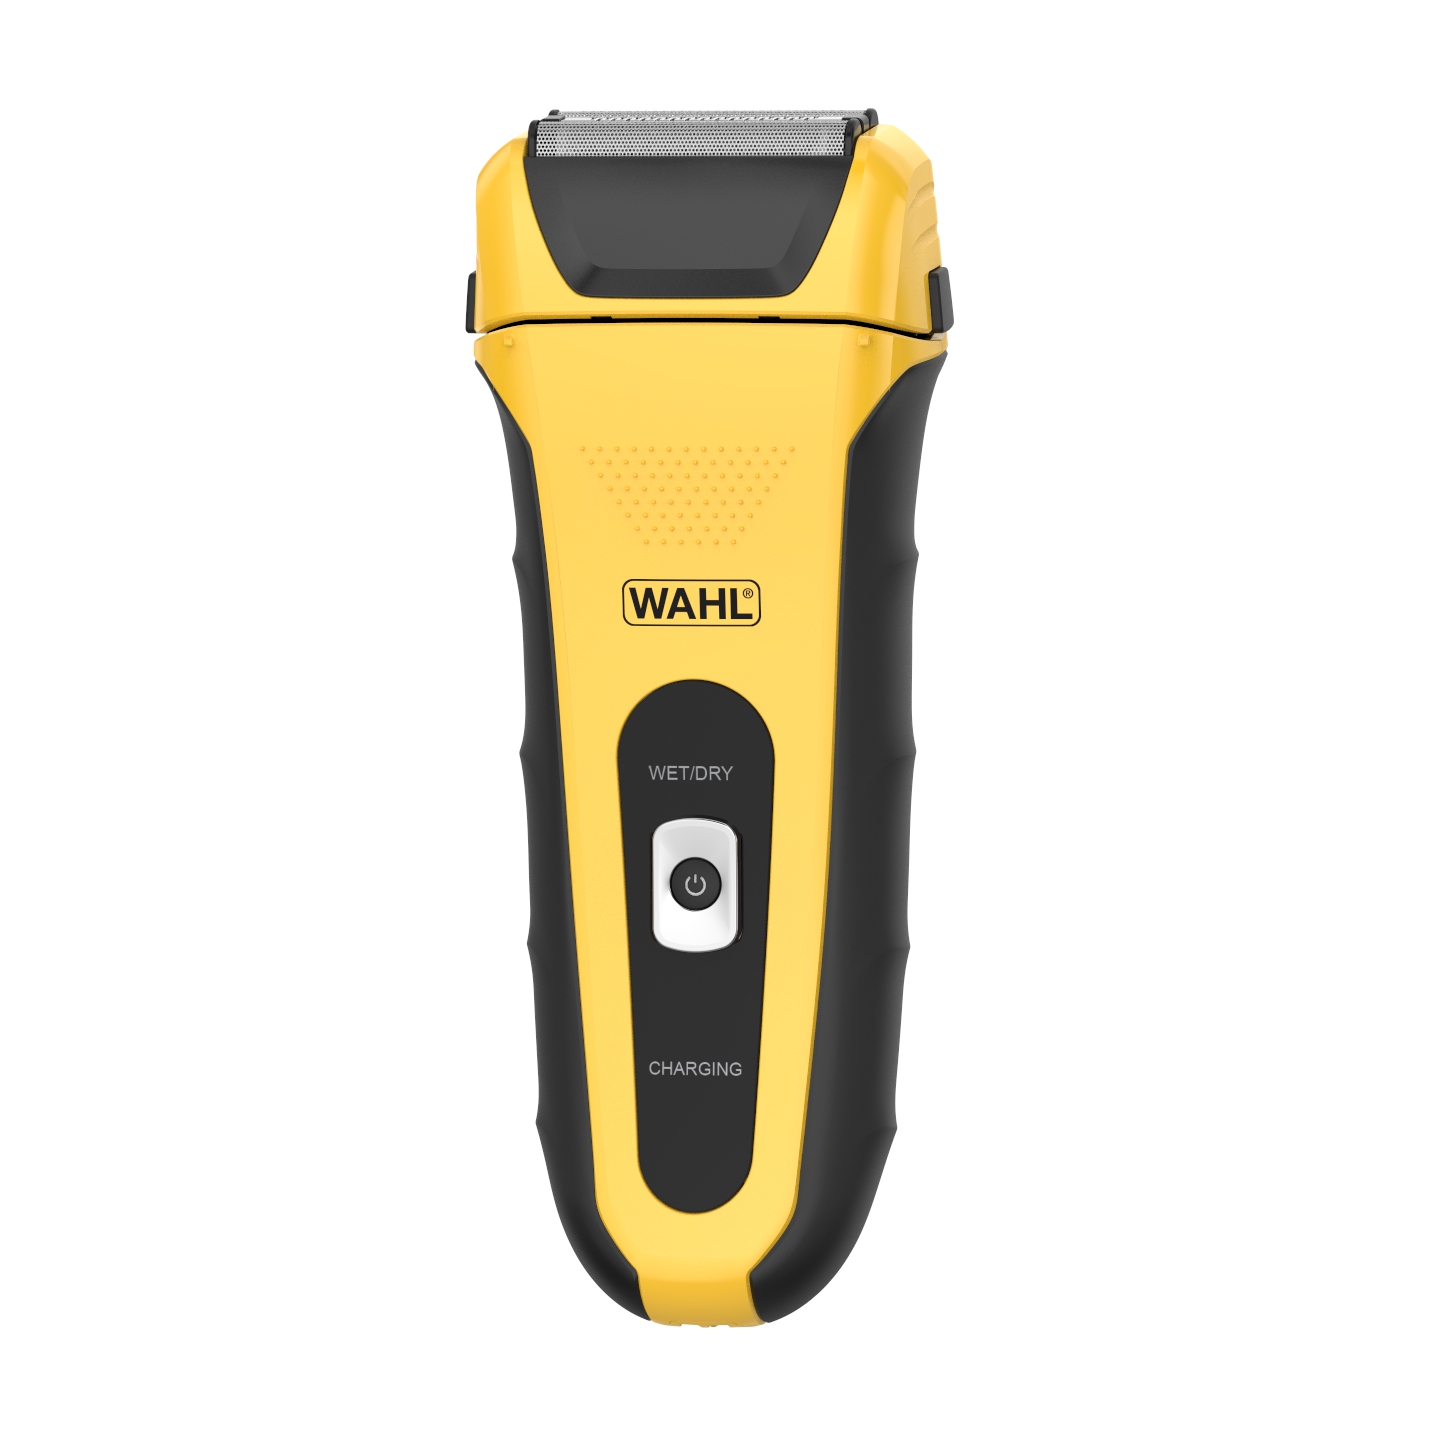 wahl 7061 replacement foil